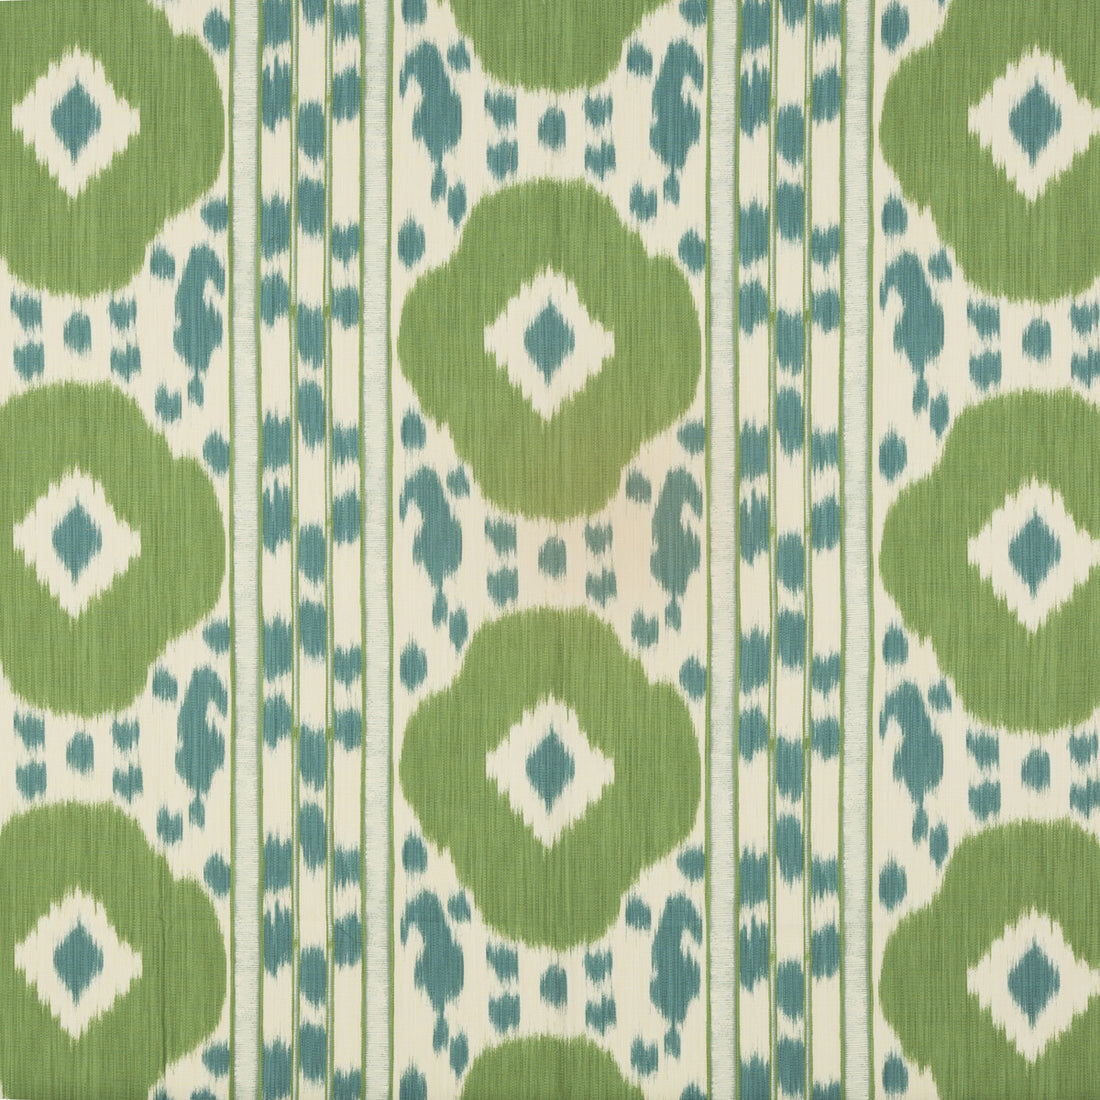 Varkala Print fabric in teal/green color - pattern 8015178.133.0 - by Brunschwig &amp; Fils in the Cape Comorin collection